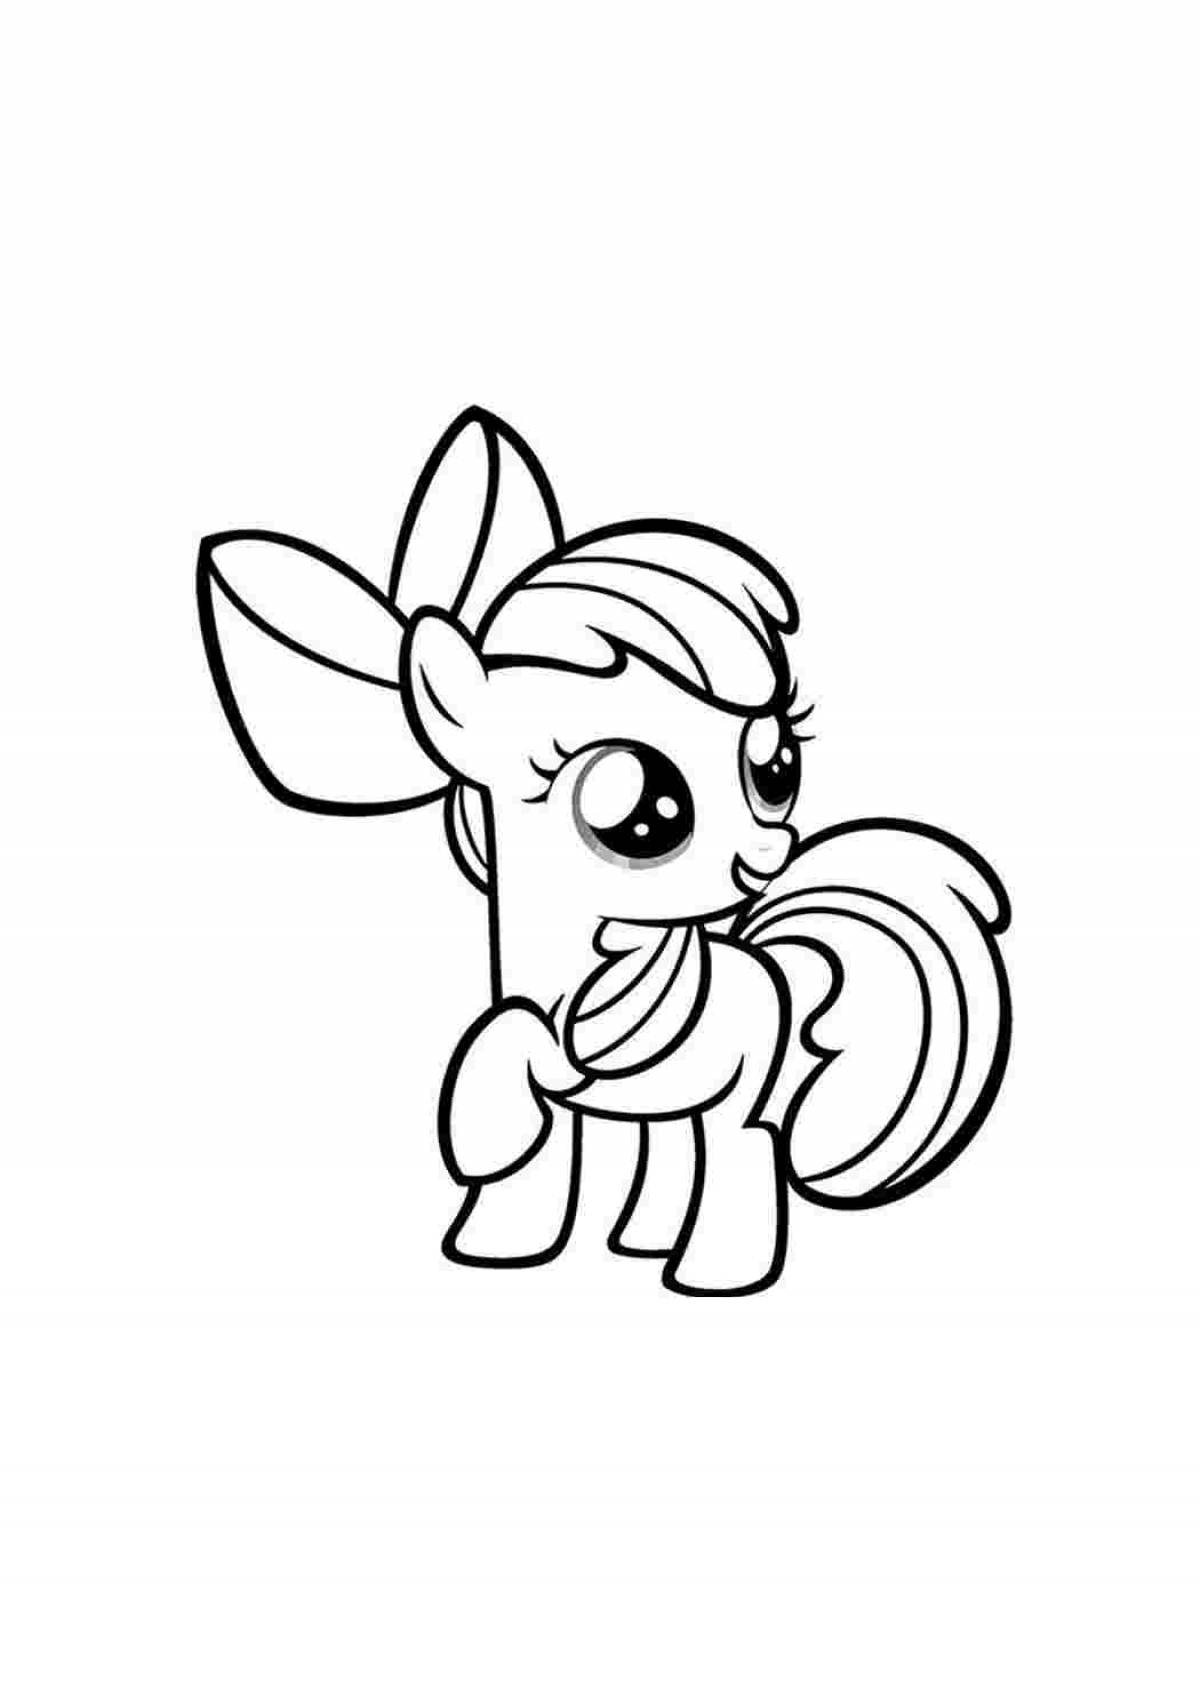 Little pony animated coloring pages for kids